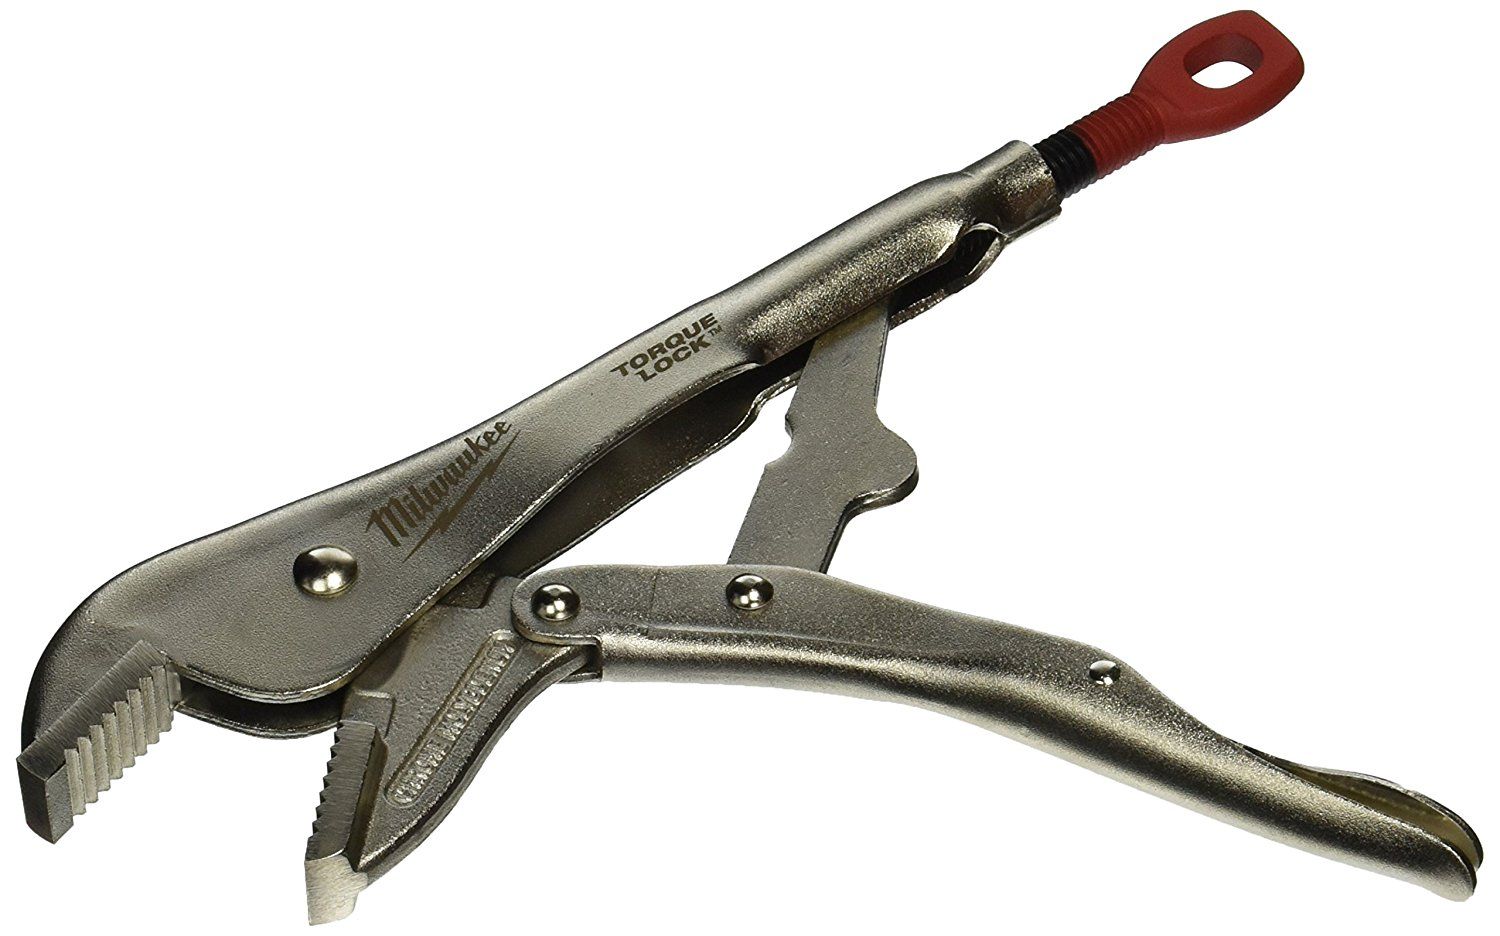 4-position Adjustment Locking Plier Pliers 200mm Grips Jaw Self Grip Vice 4190 